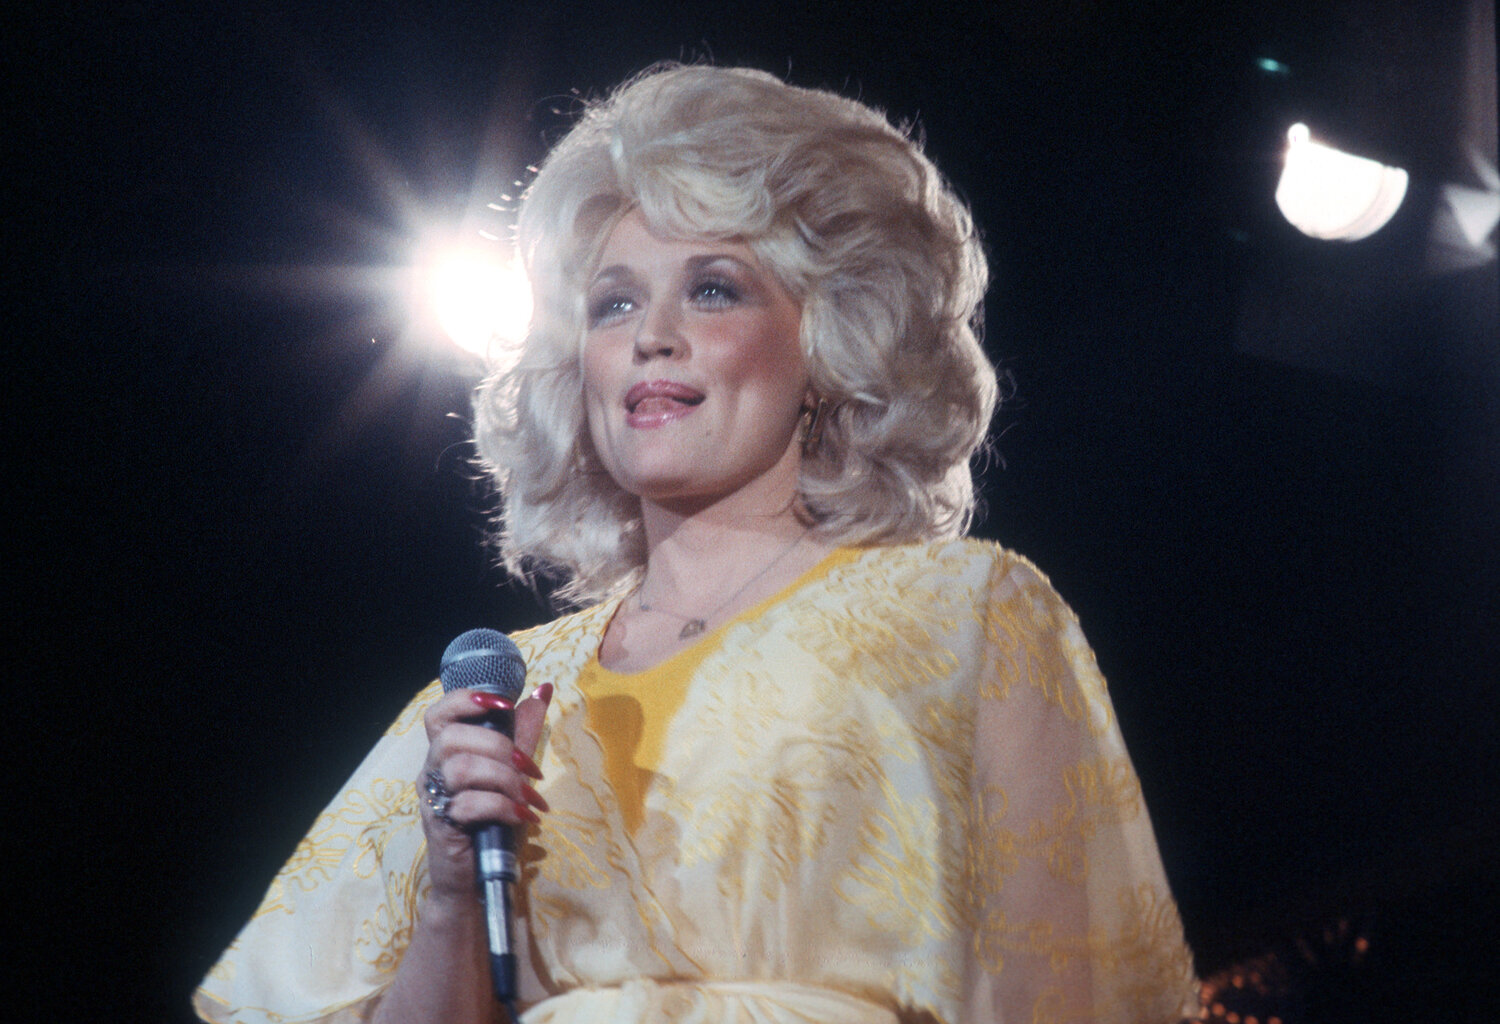 Dolly Parton performs onstage wearing a yellow dress in 1975 in Los Angeles, California.